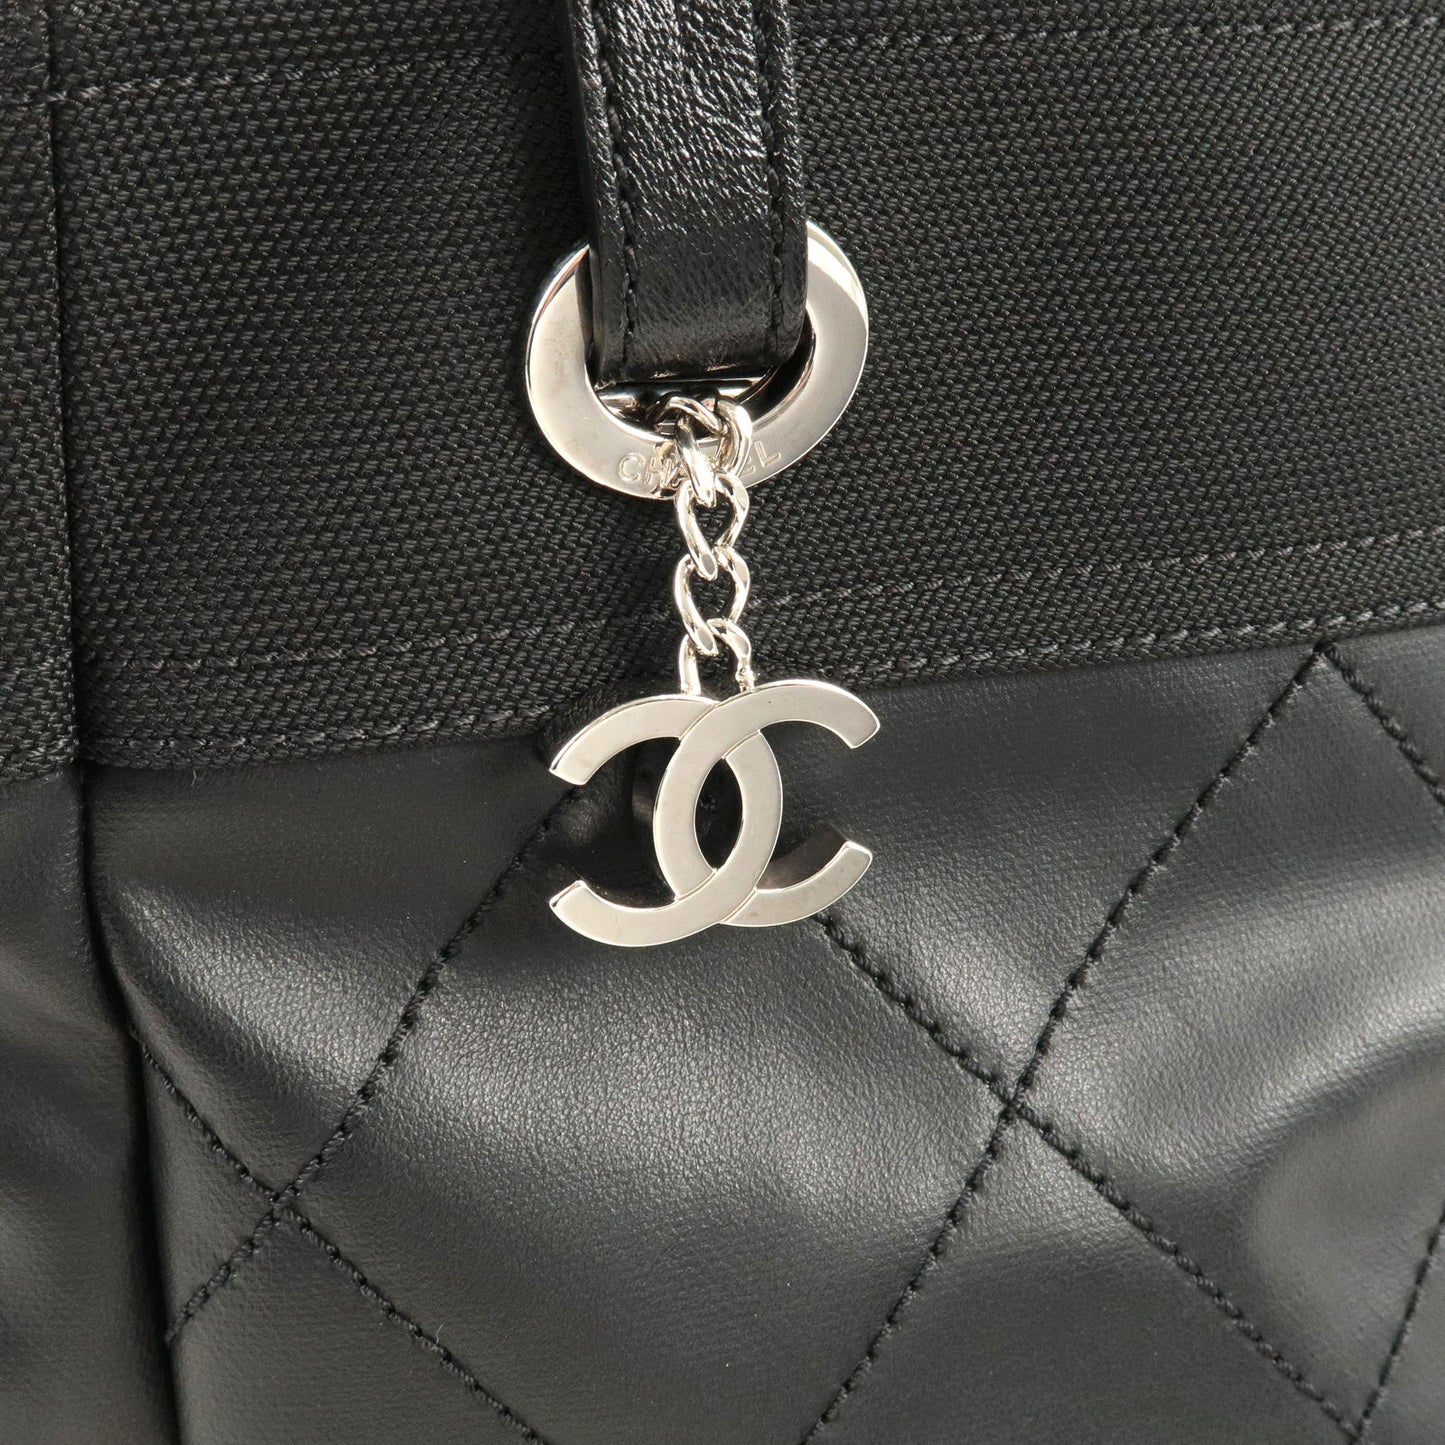 CHANEL Paris Biarritz PM Coated Canvas Leather Tote Bag A34208